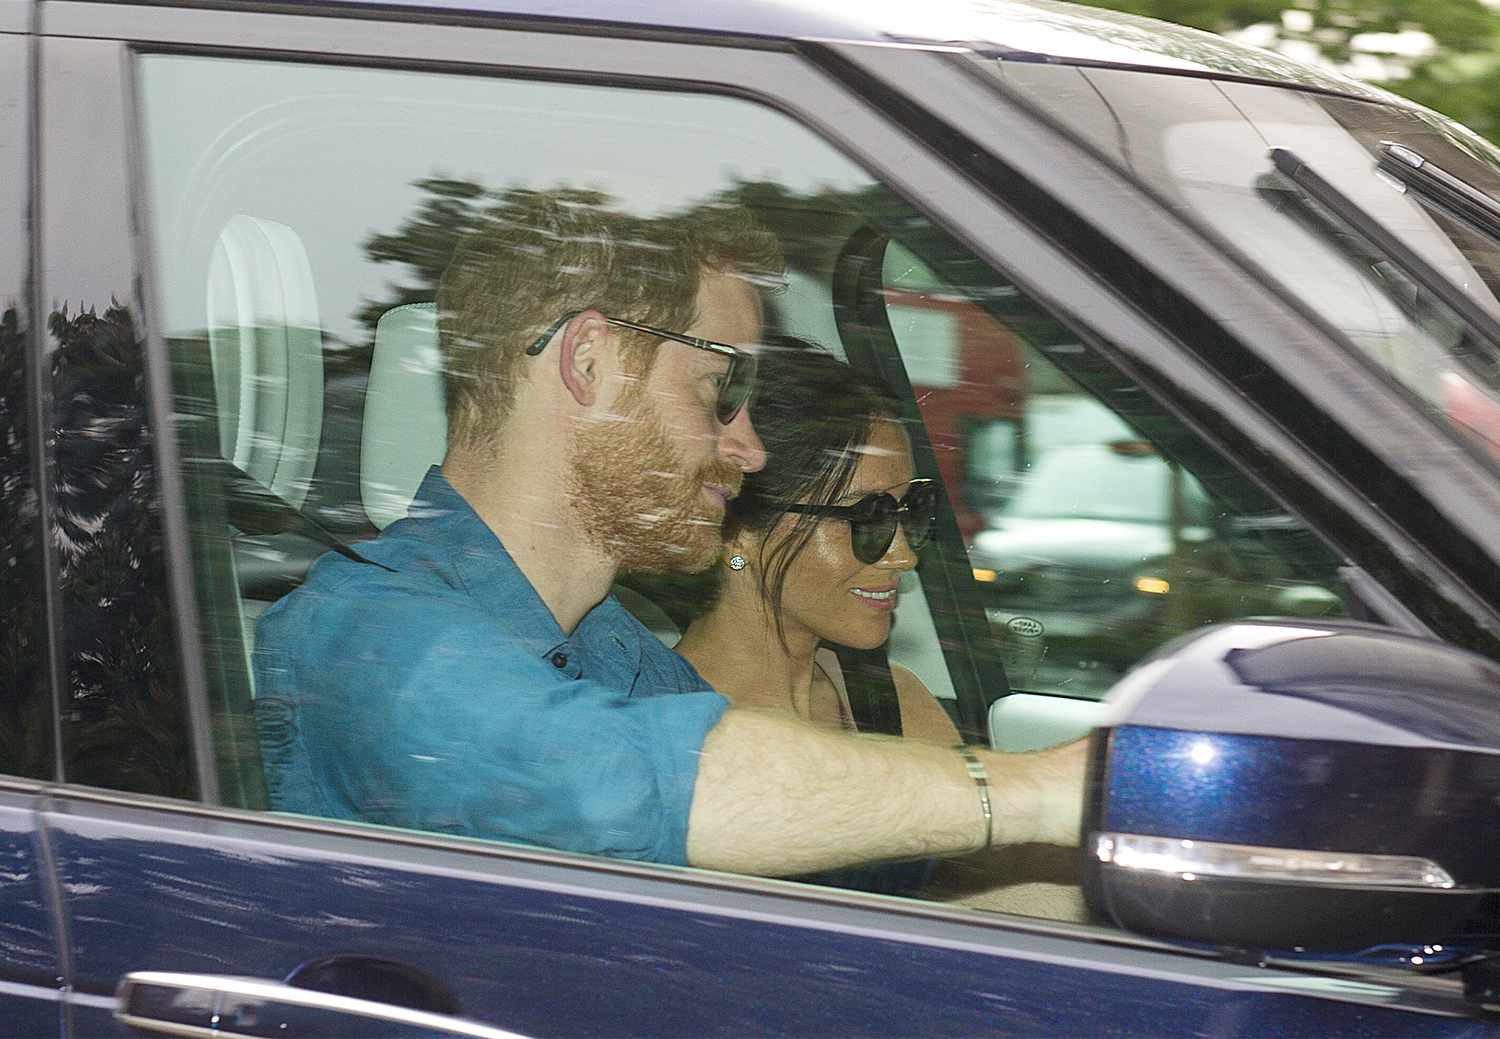 EXCLUSIVE: Prince Harry and Meghan Markle arriving back at Kensington Palace